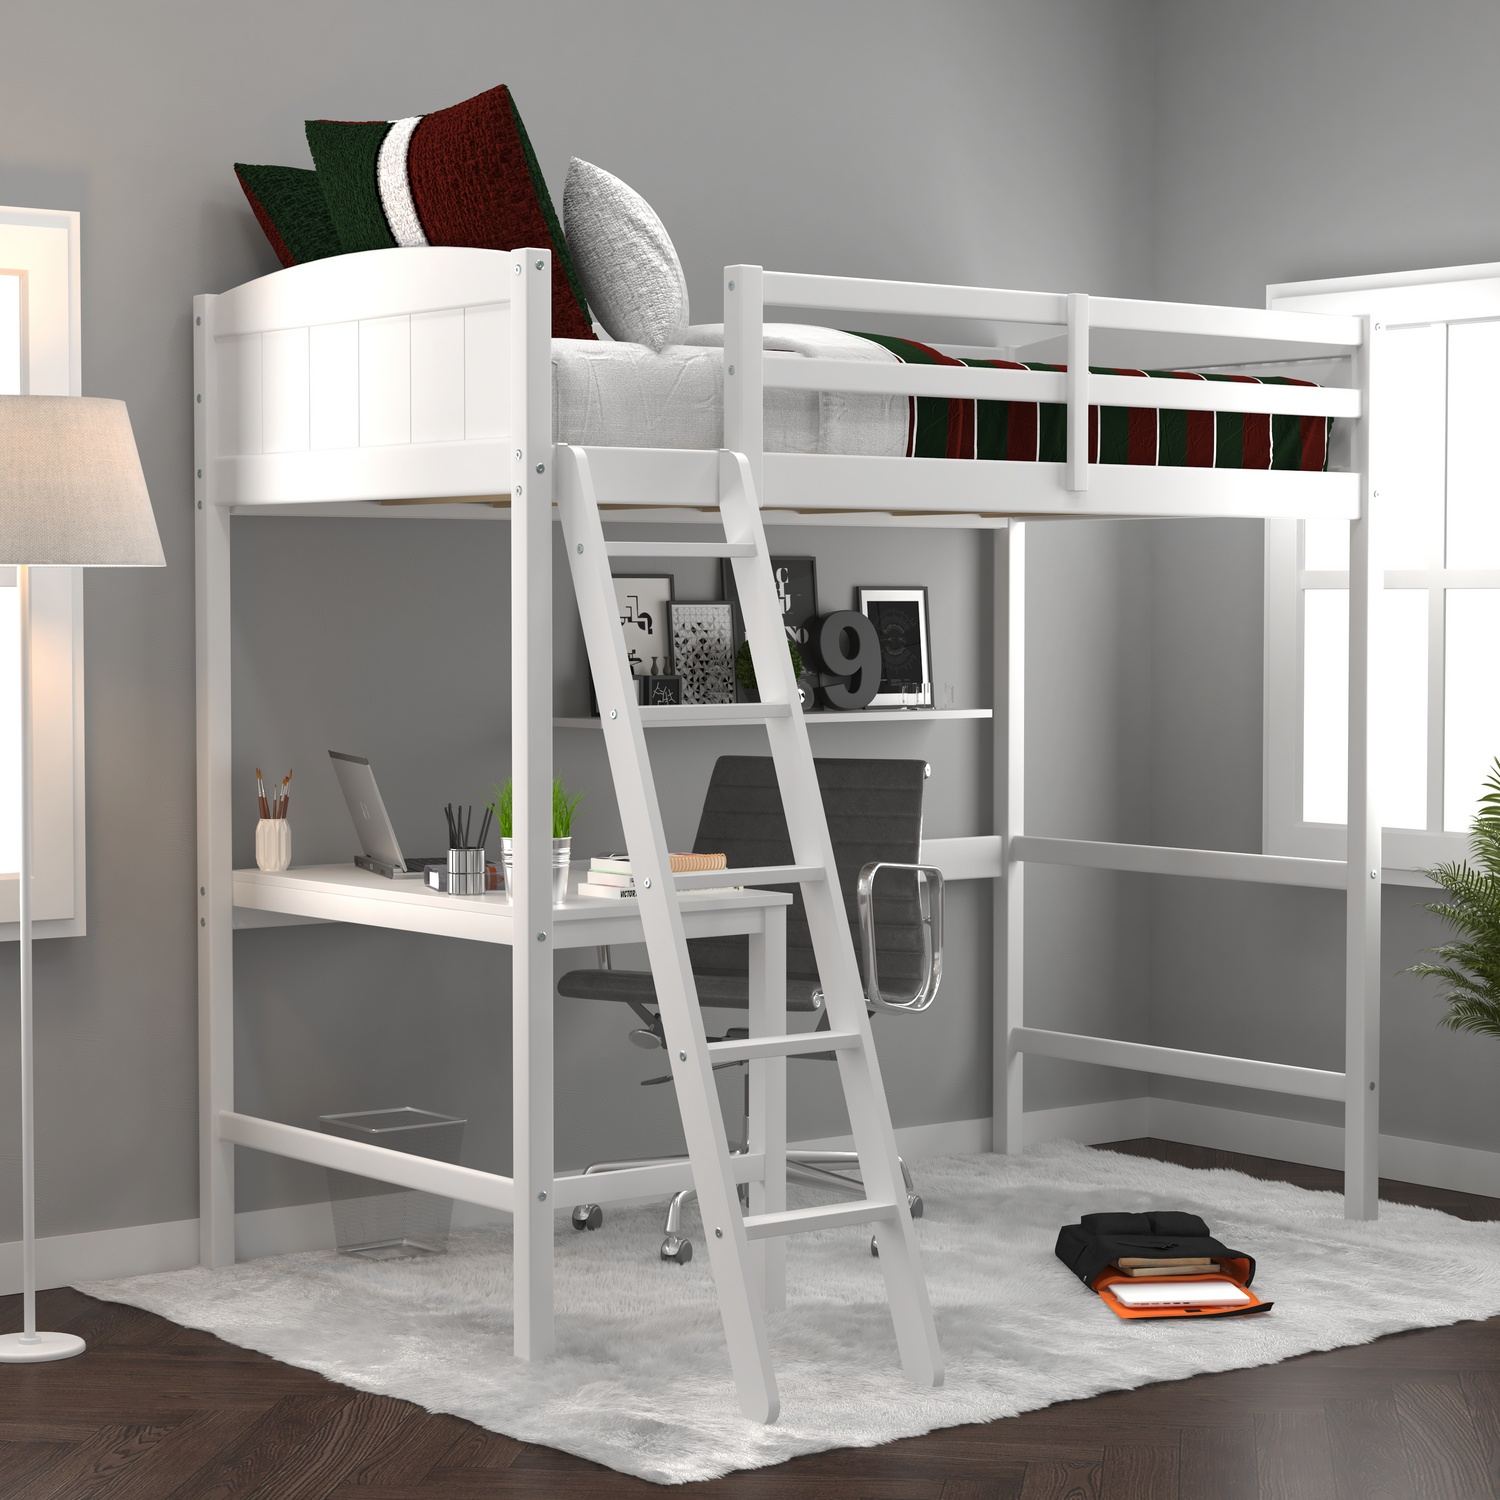 Hillsdale Alexis Wood Arch Twin Loft Bed with Desk - White